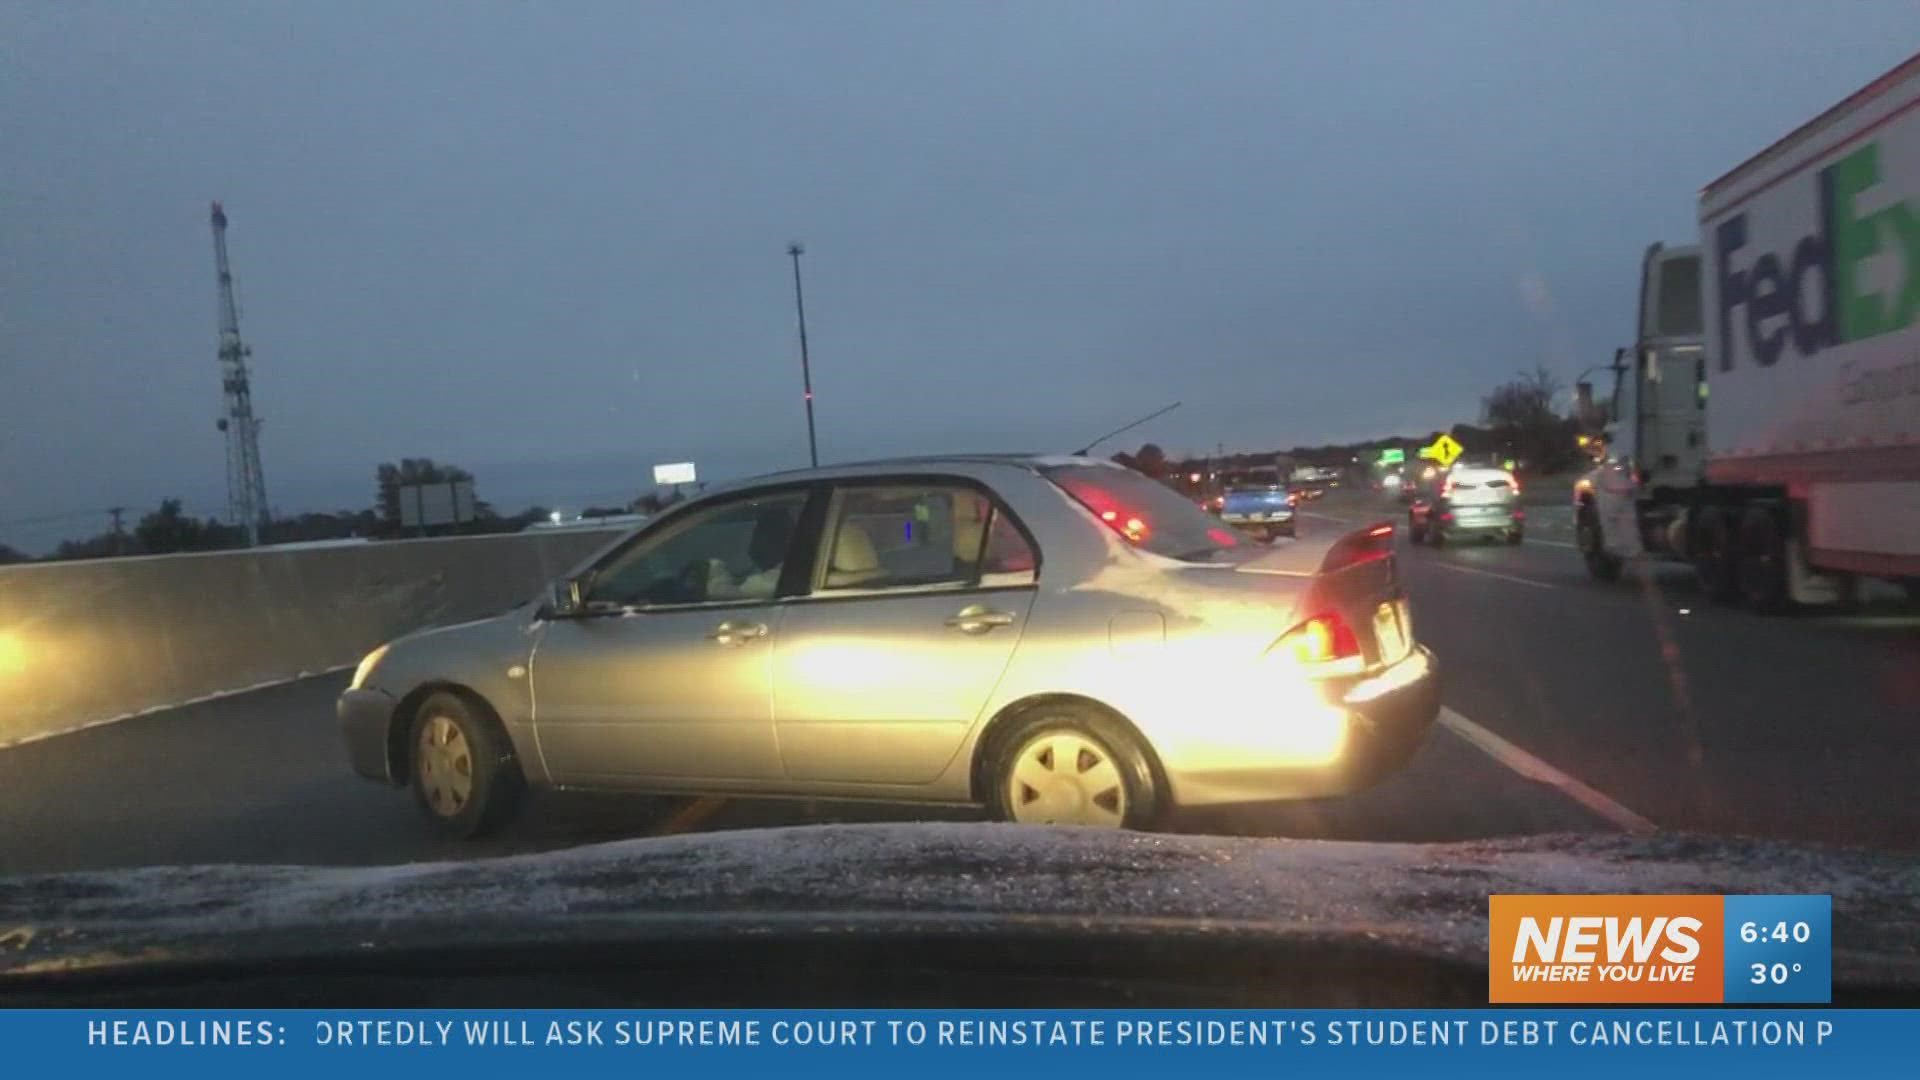 Multiple crashes stopped traffic on I-49 in Northwest Arkansas due to slick conditions.